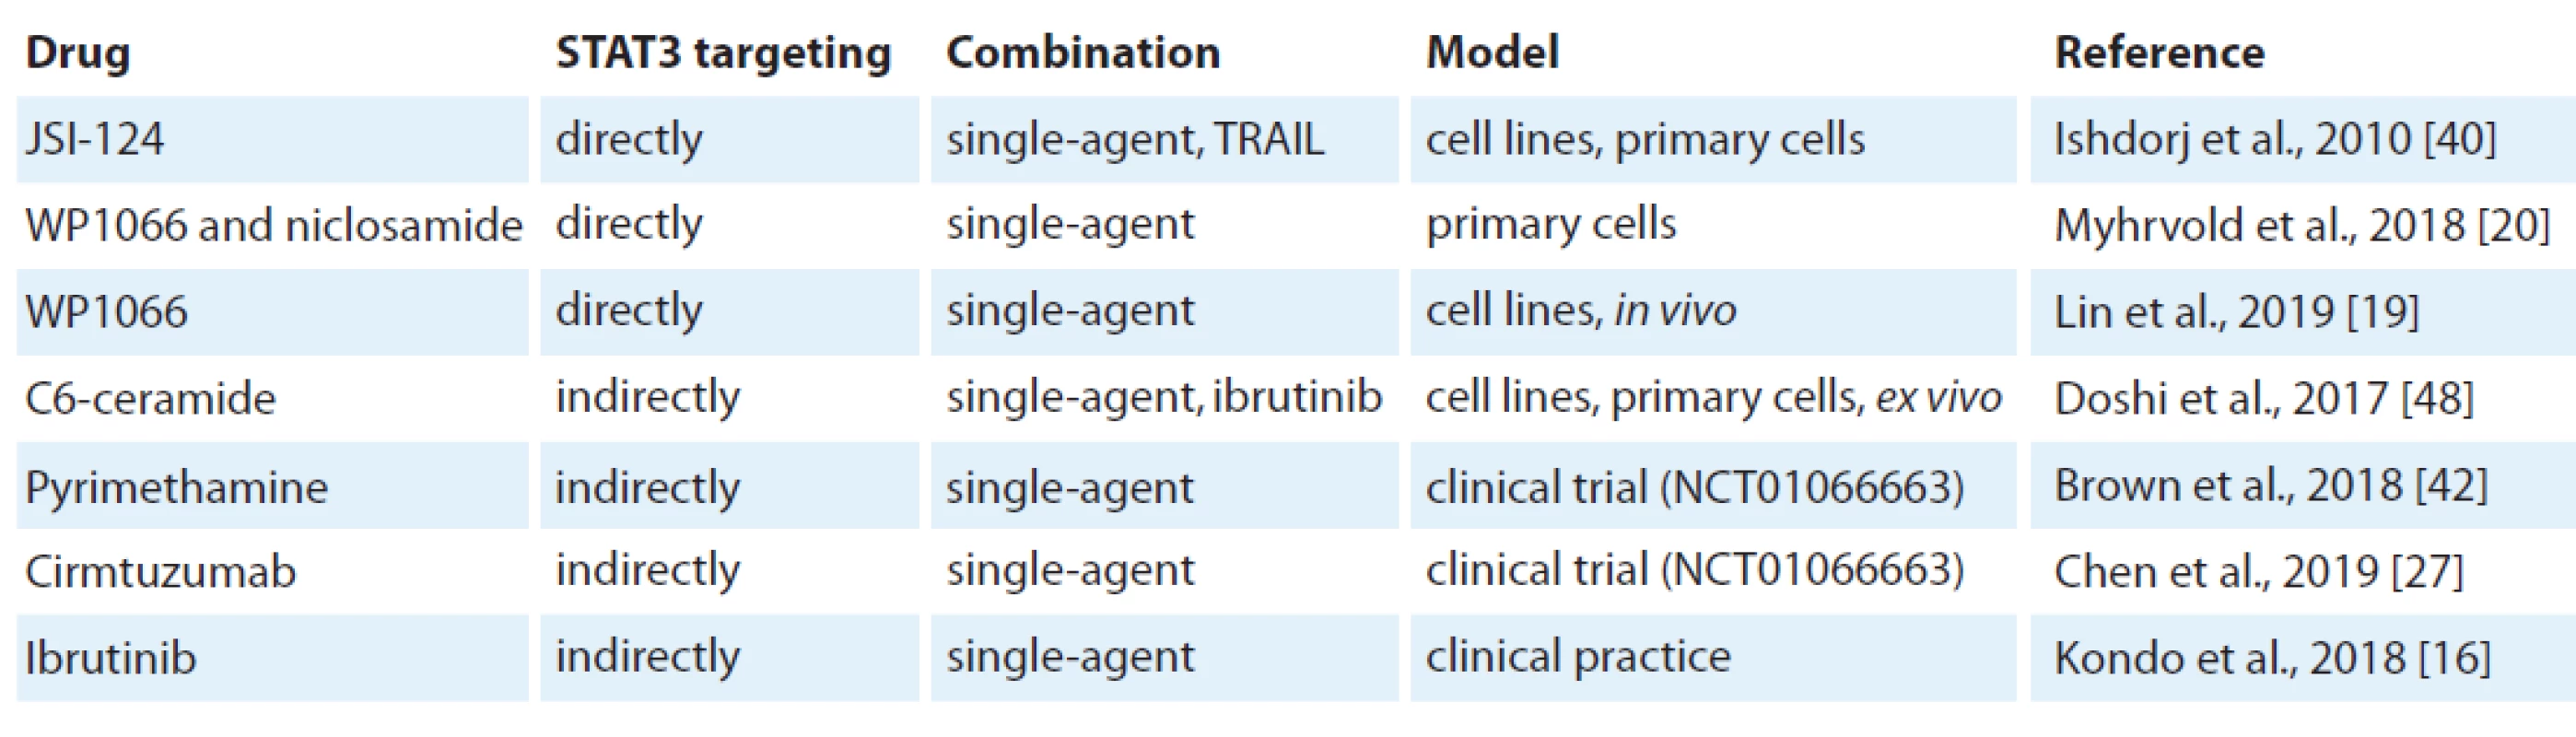 Preclinical and clinical testing of STAT3 inhibition.